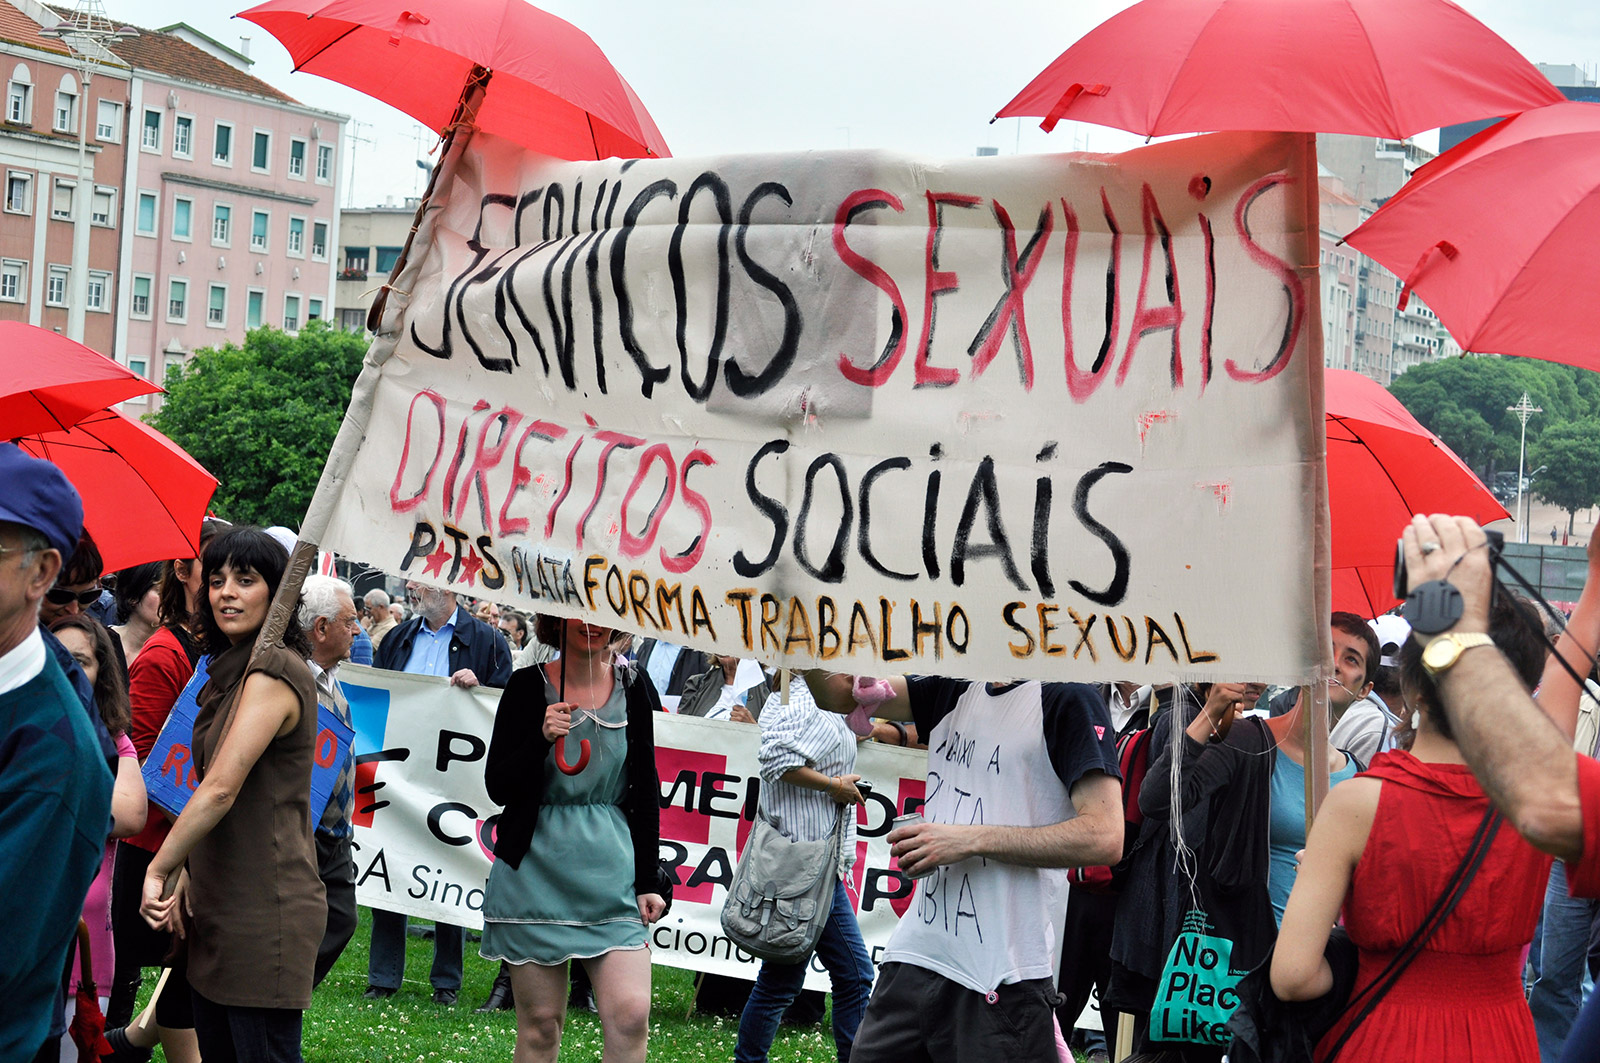 Access or sex workers rights in Portugal openDemocracy pic